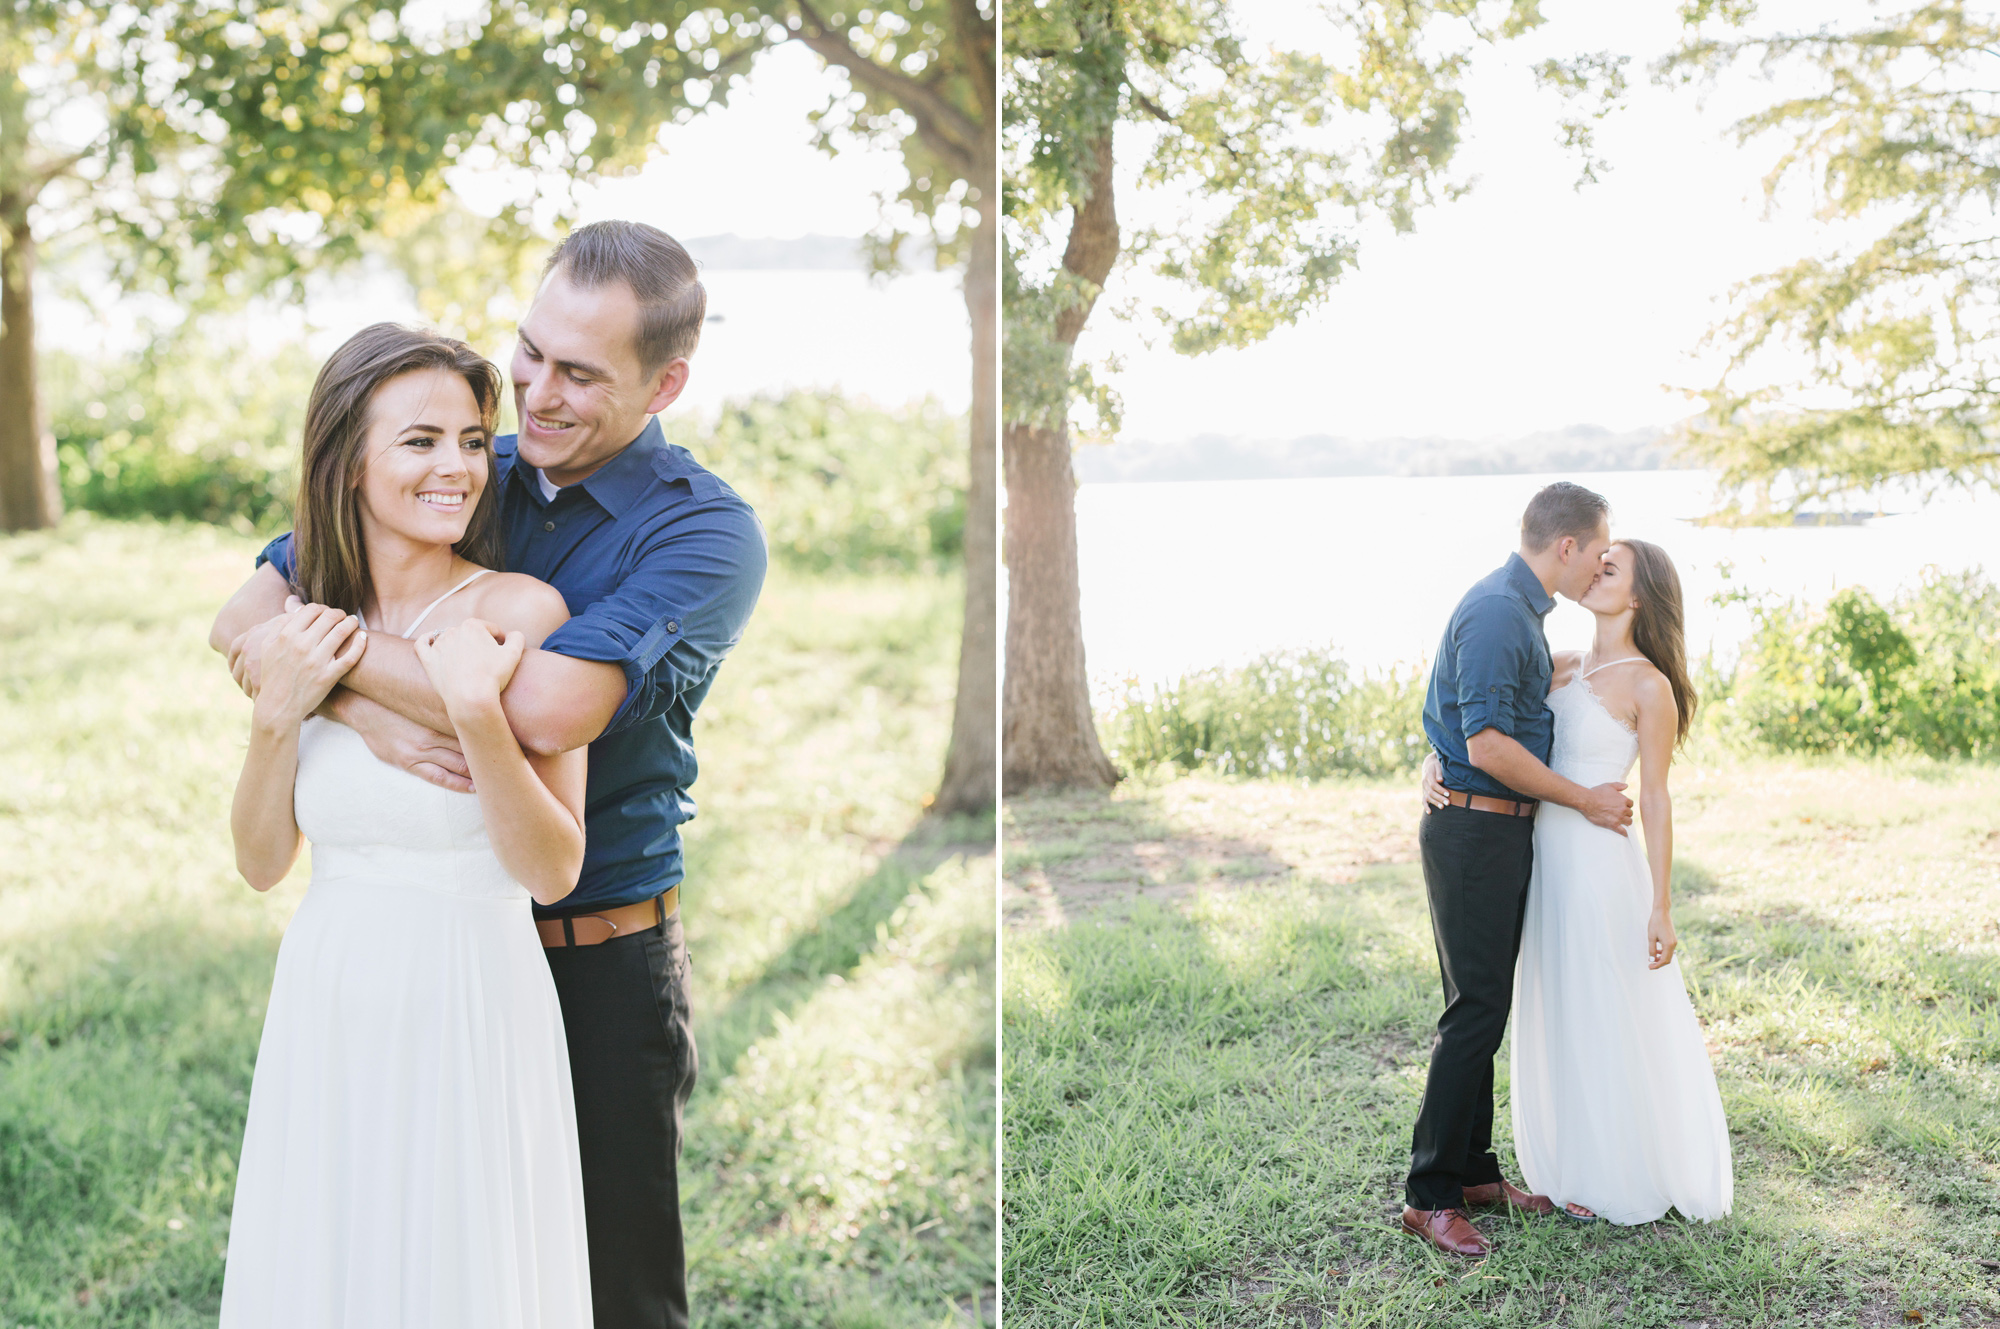 Dallas wedding photography packages from fine art photographer Tenth & Grace.